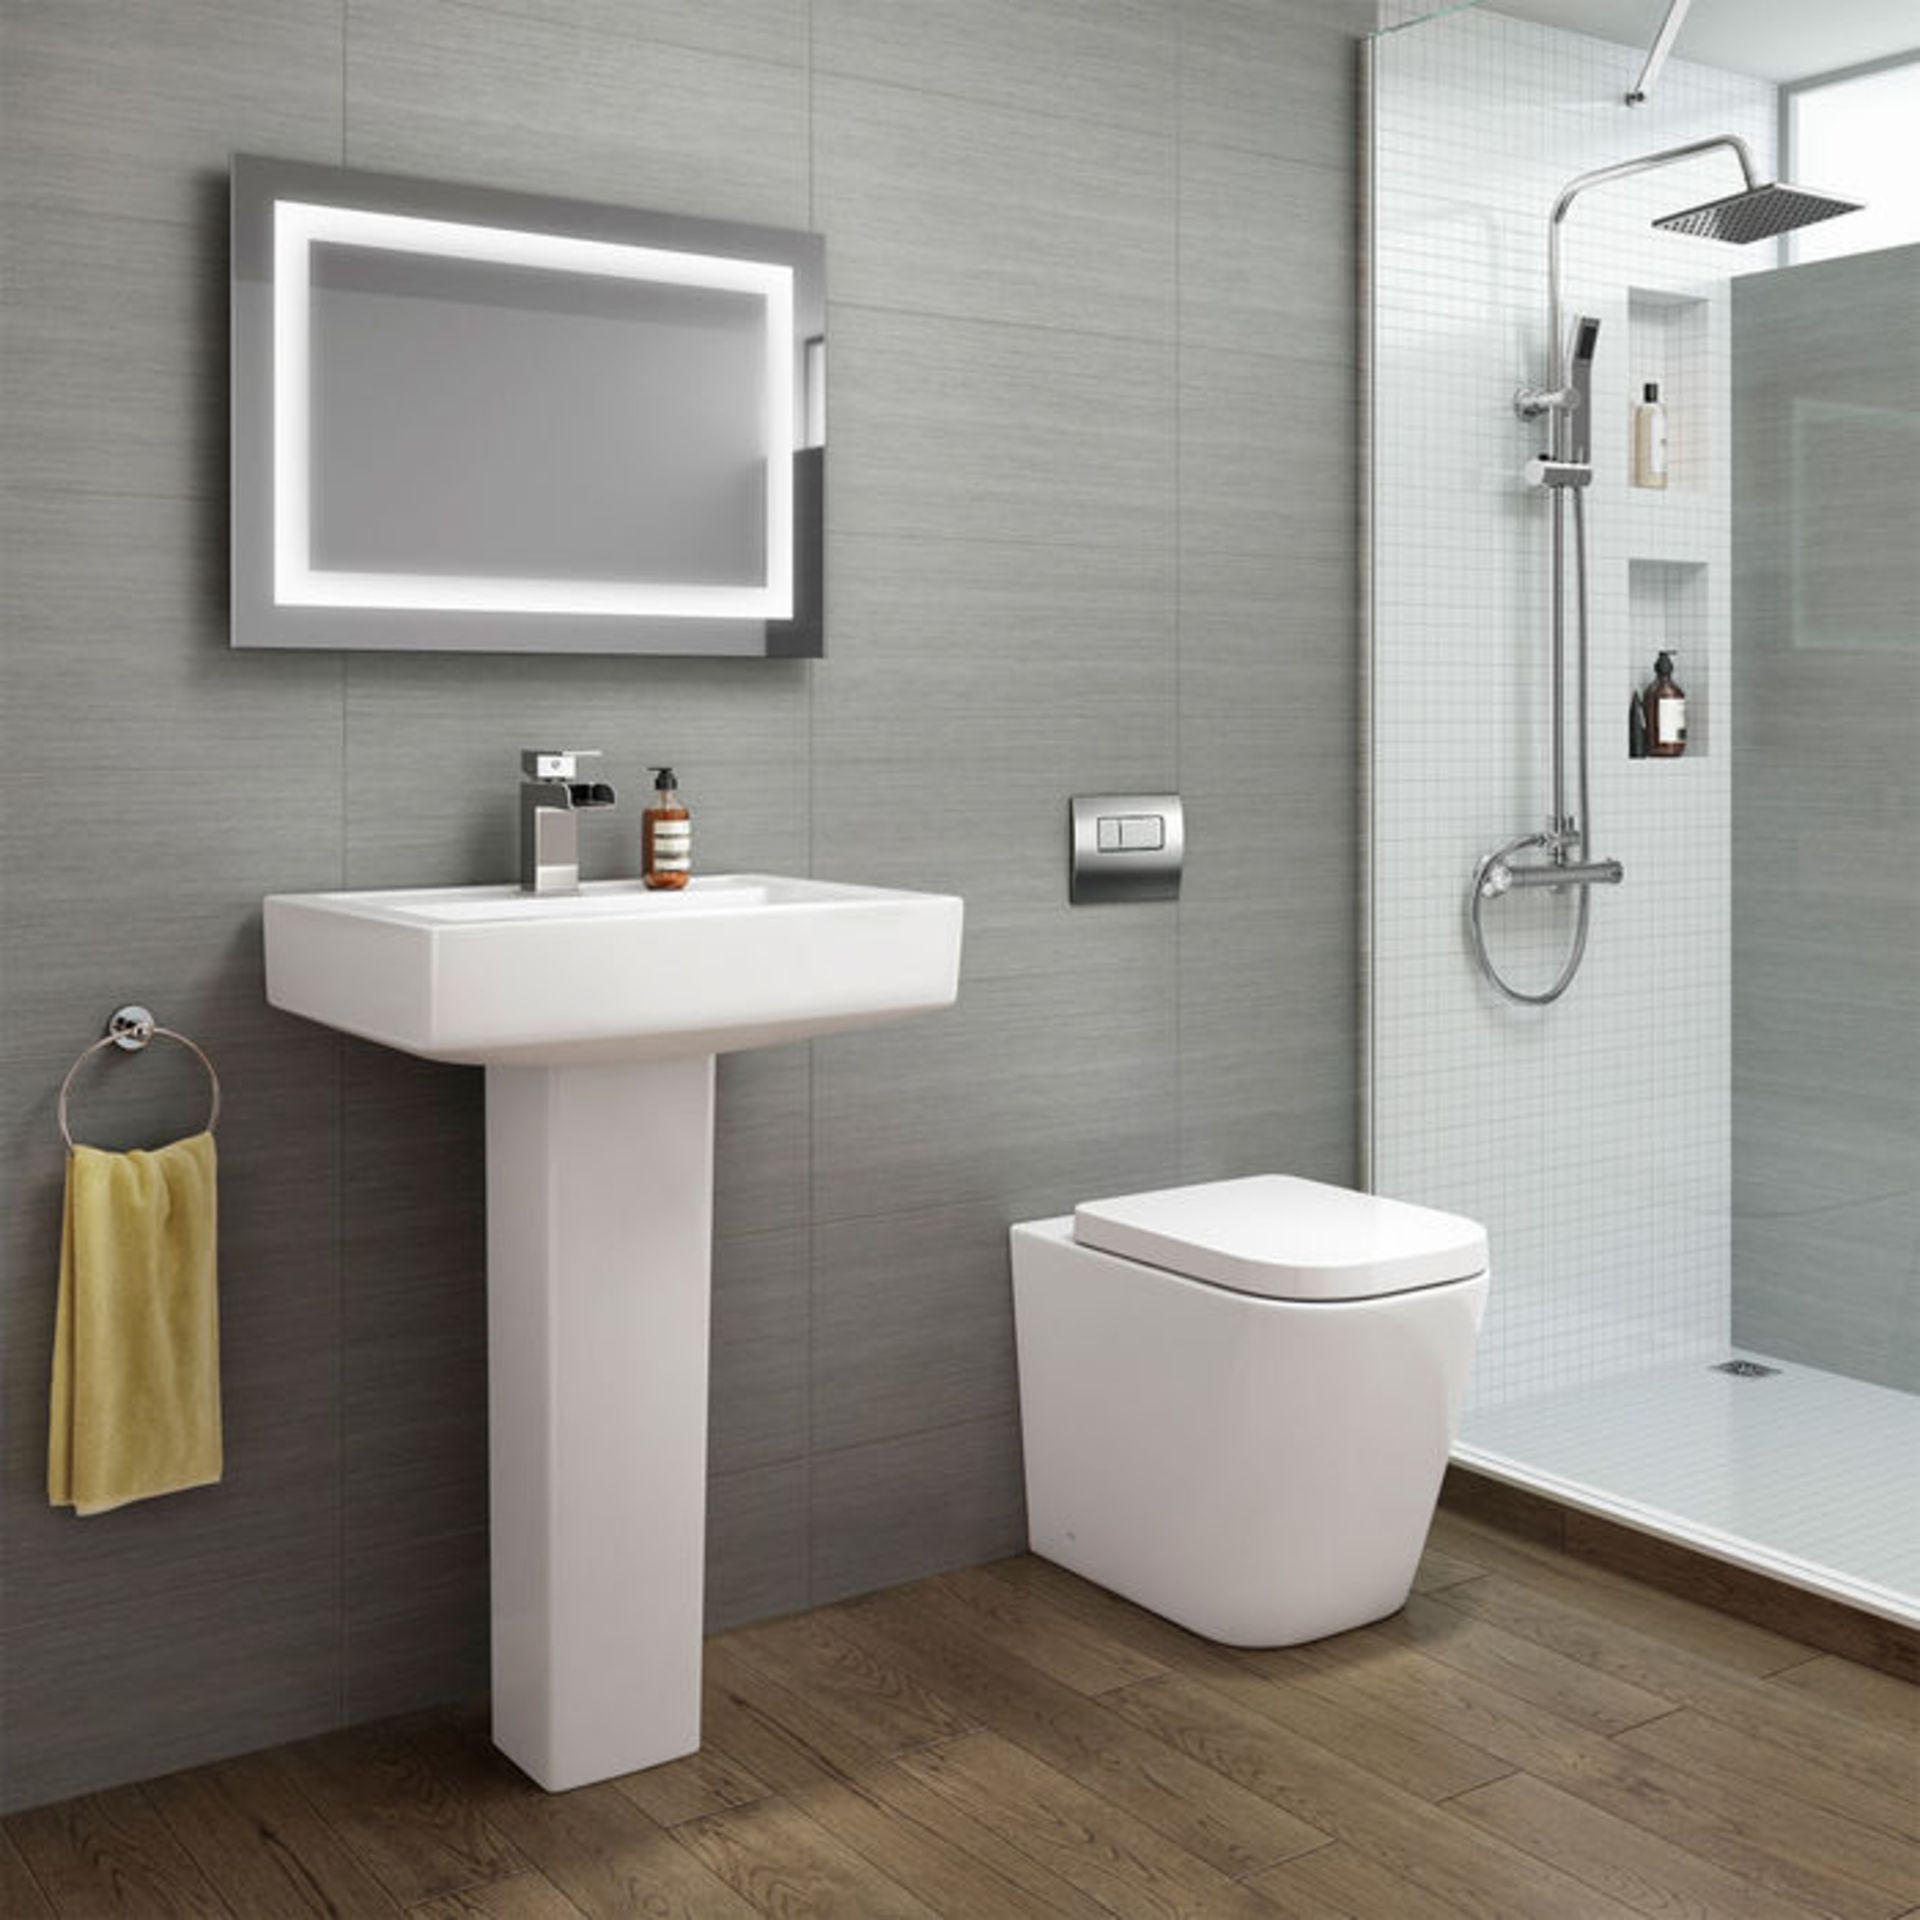 New Florence Rimless Back To Wall Toilet Inc Luxury Soft Close Seat. Rimless Design Makes It E... - Image 2 of 2